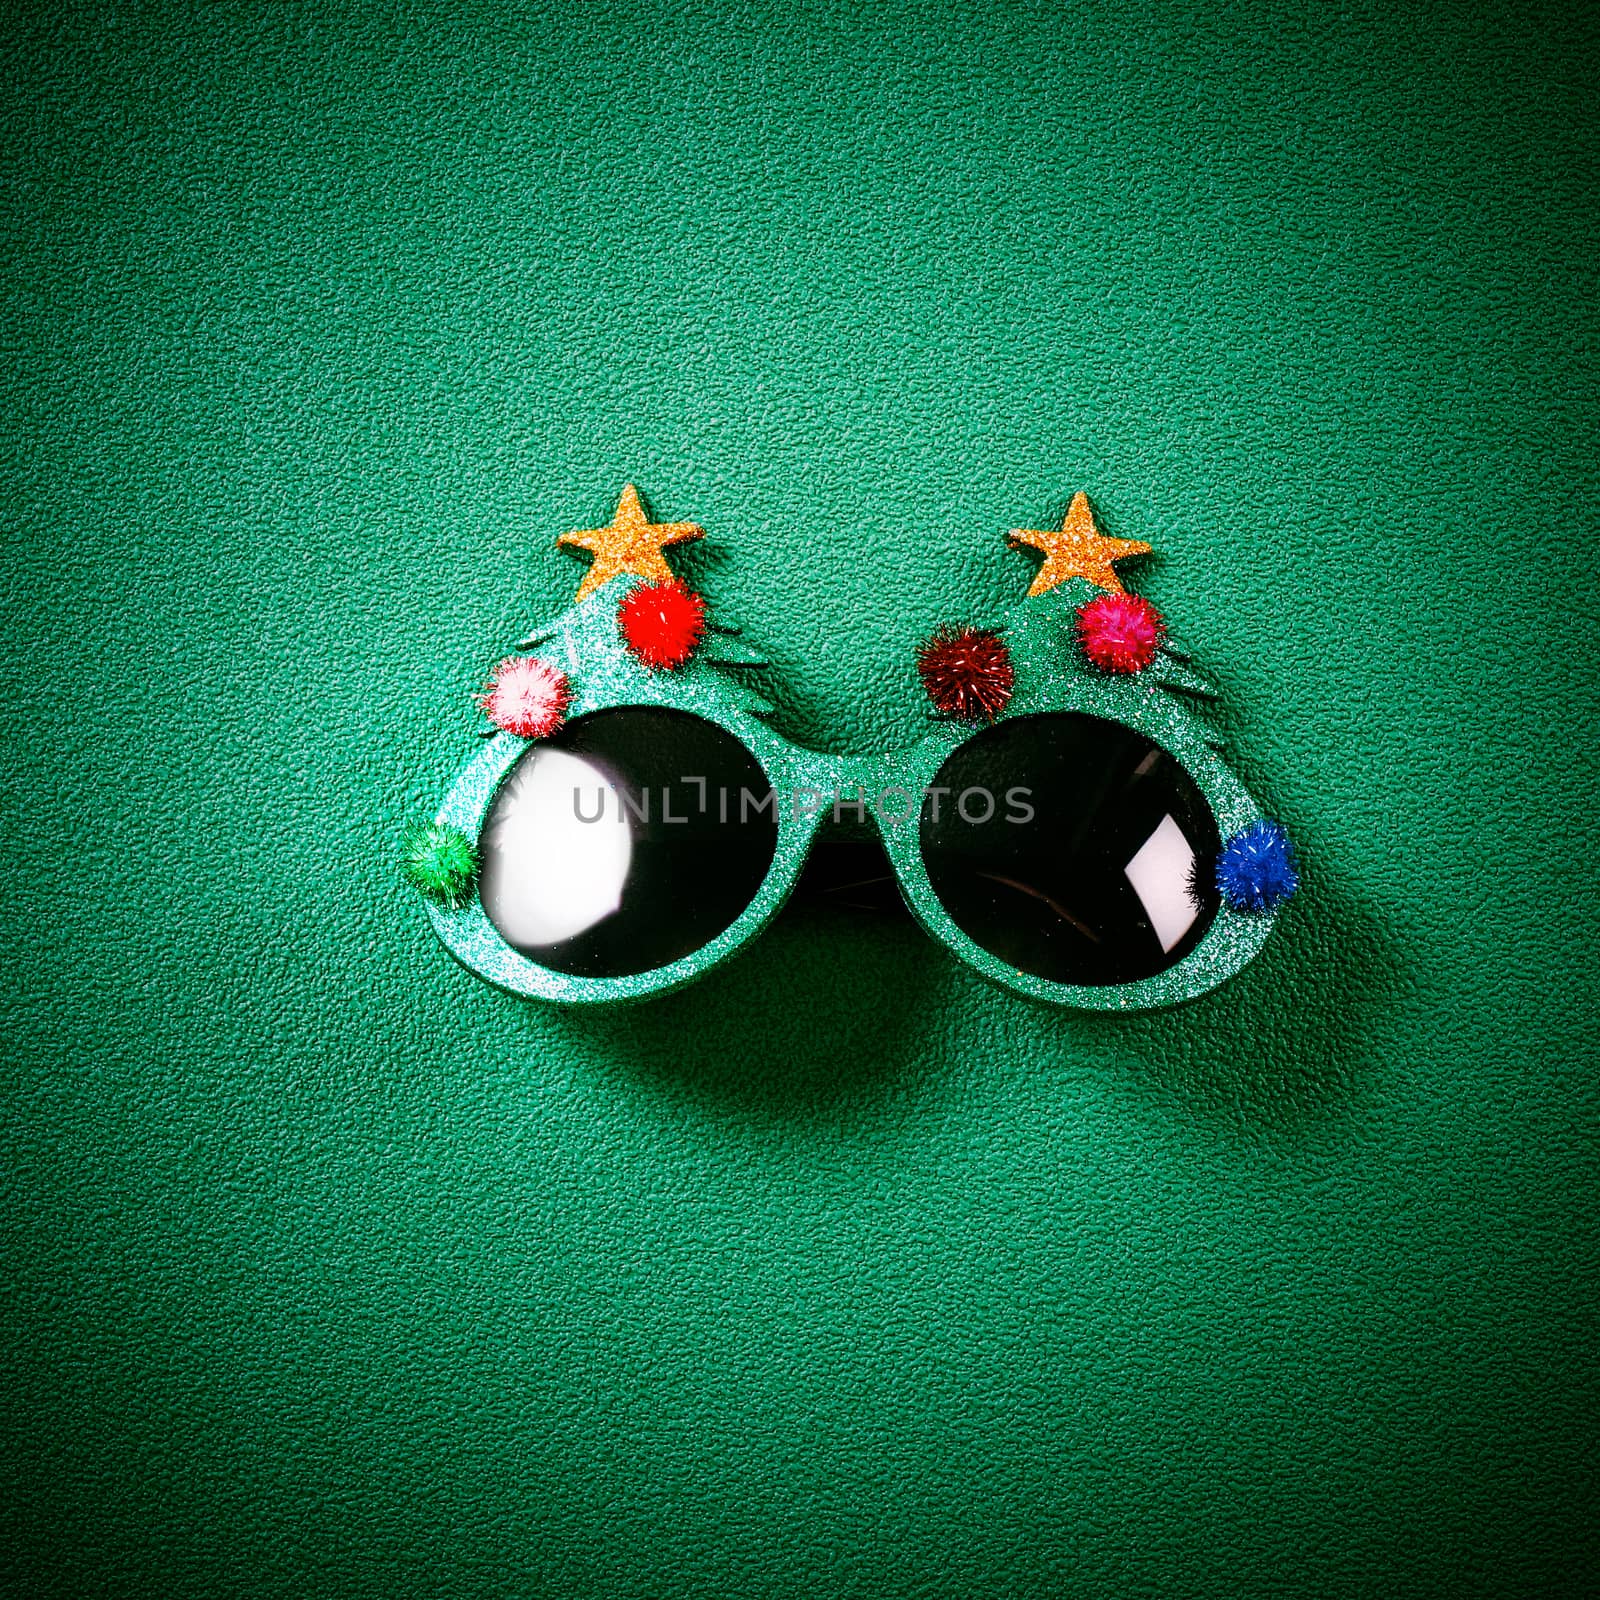 Christmas glasses that decoration with Christmas tree and red ball on green background